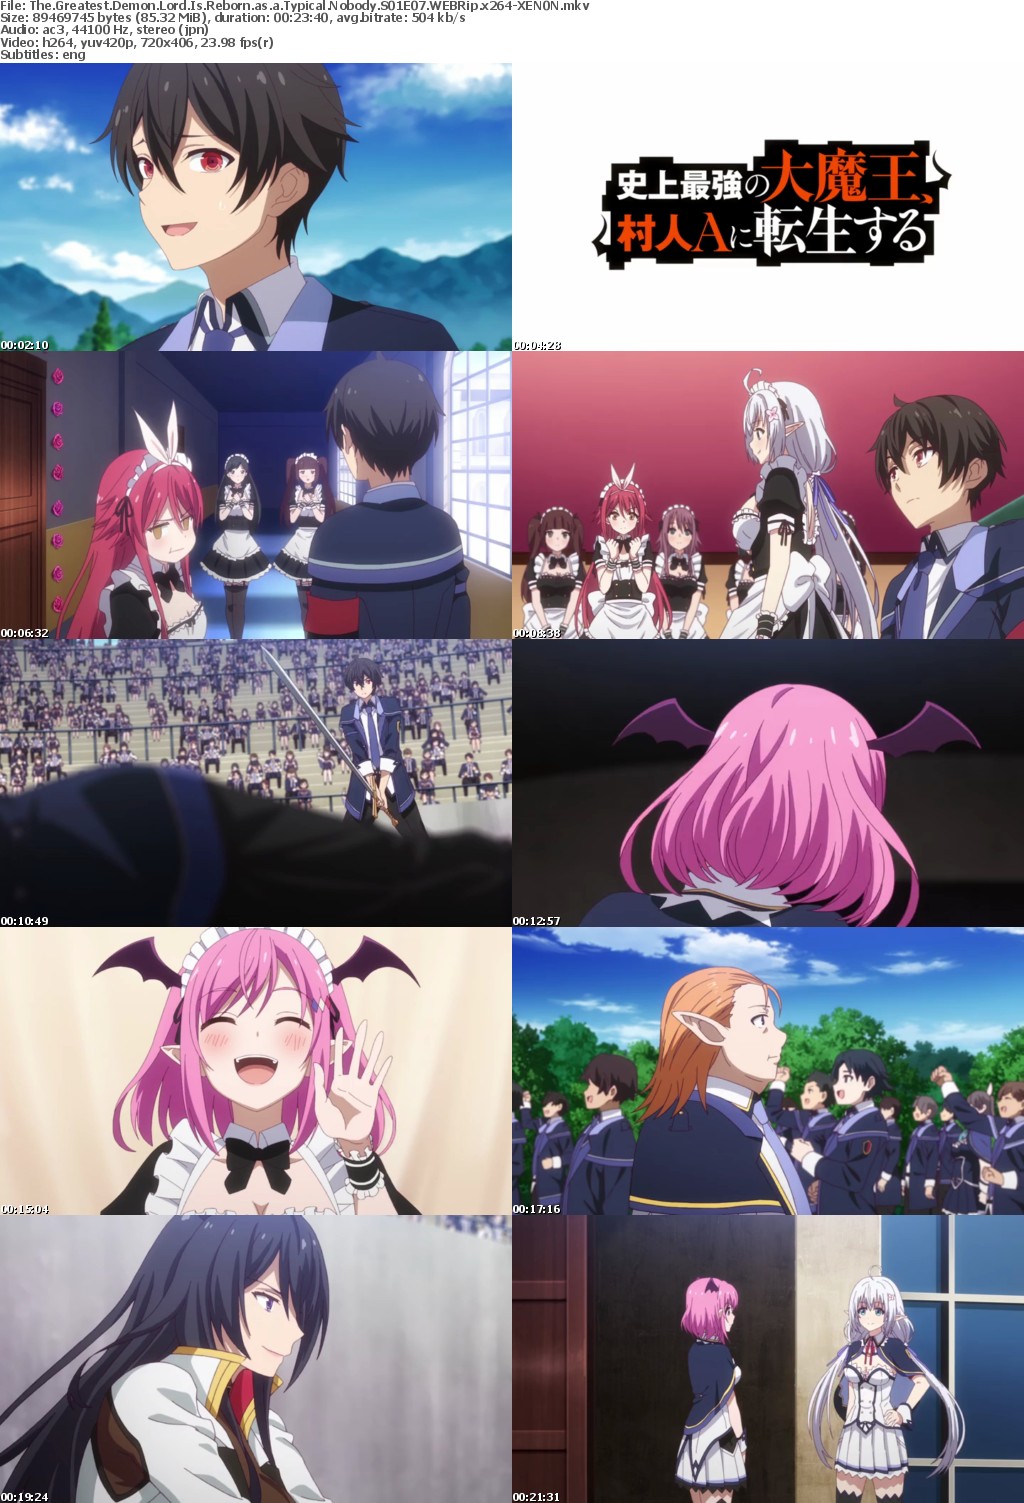 The Greatest Demon Lord Is Reborn as a Typical Nobody S01E07 WEBRip x264-XEN0N